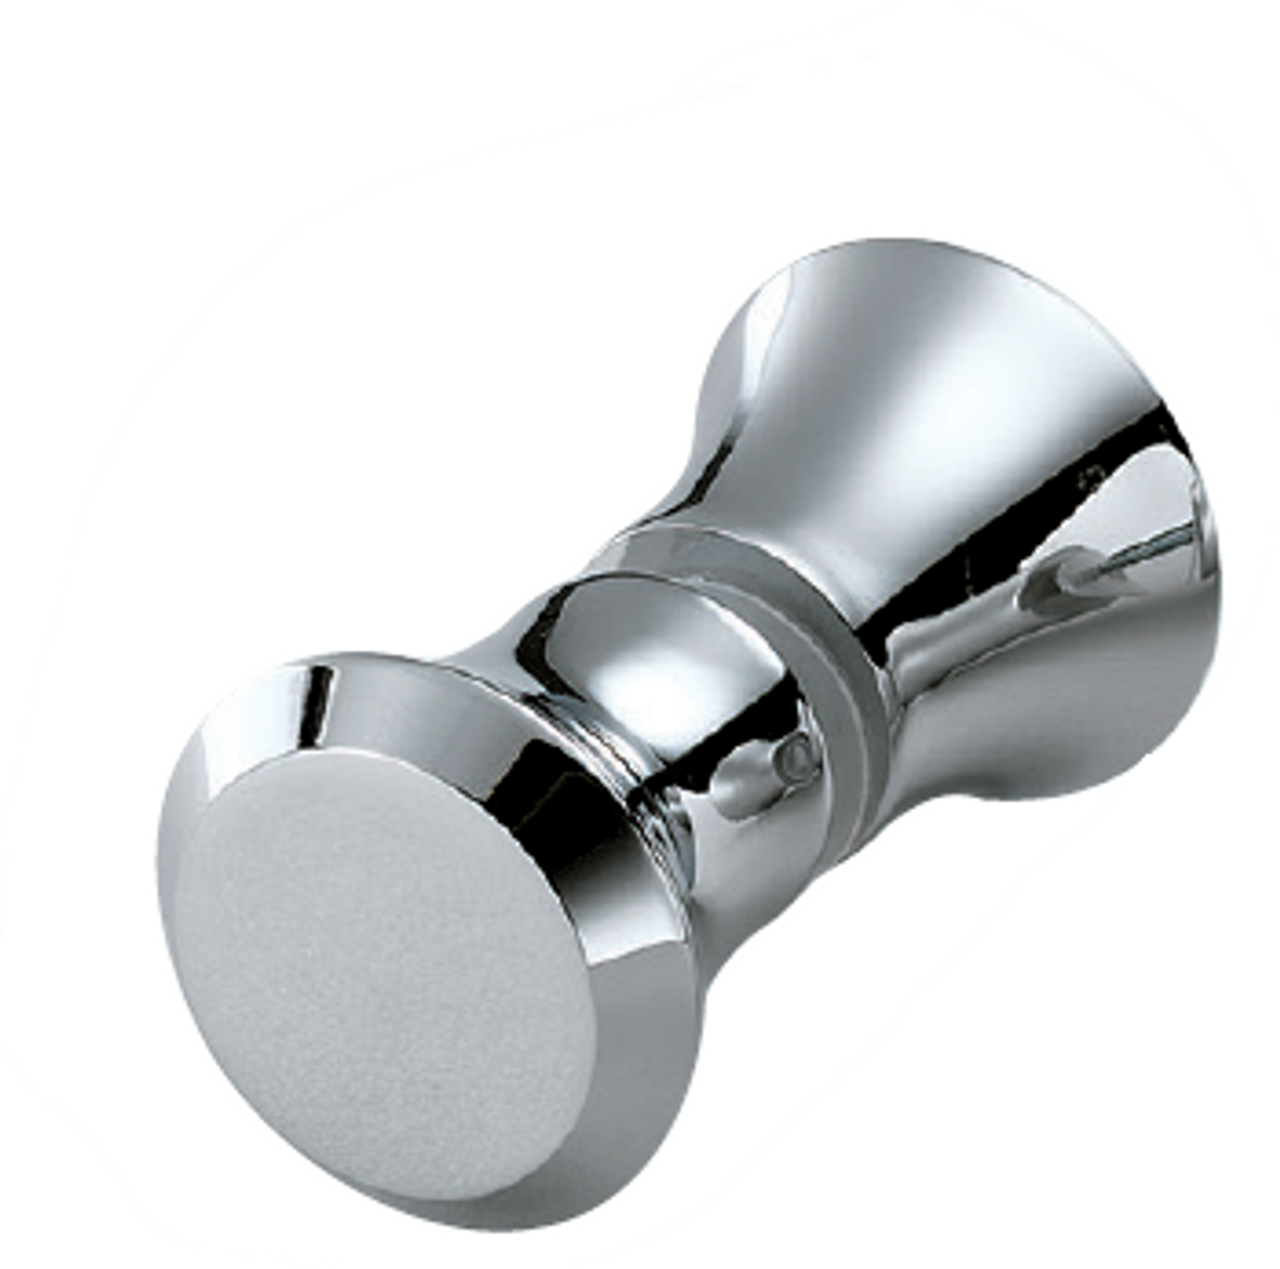 Sugatsune DG-BT2 SERIES BACK TO BACK GLASS DOOR KNOB SOLID BRASS SATIN CHROME AND CHROME FINISHES